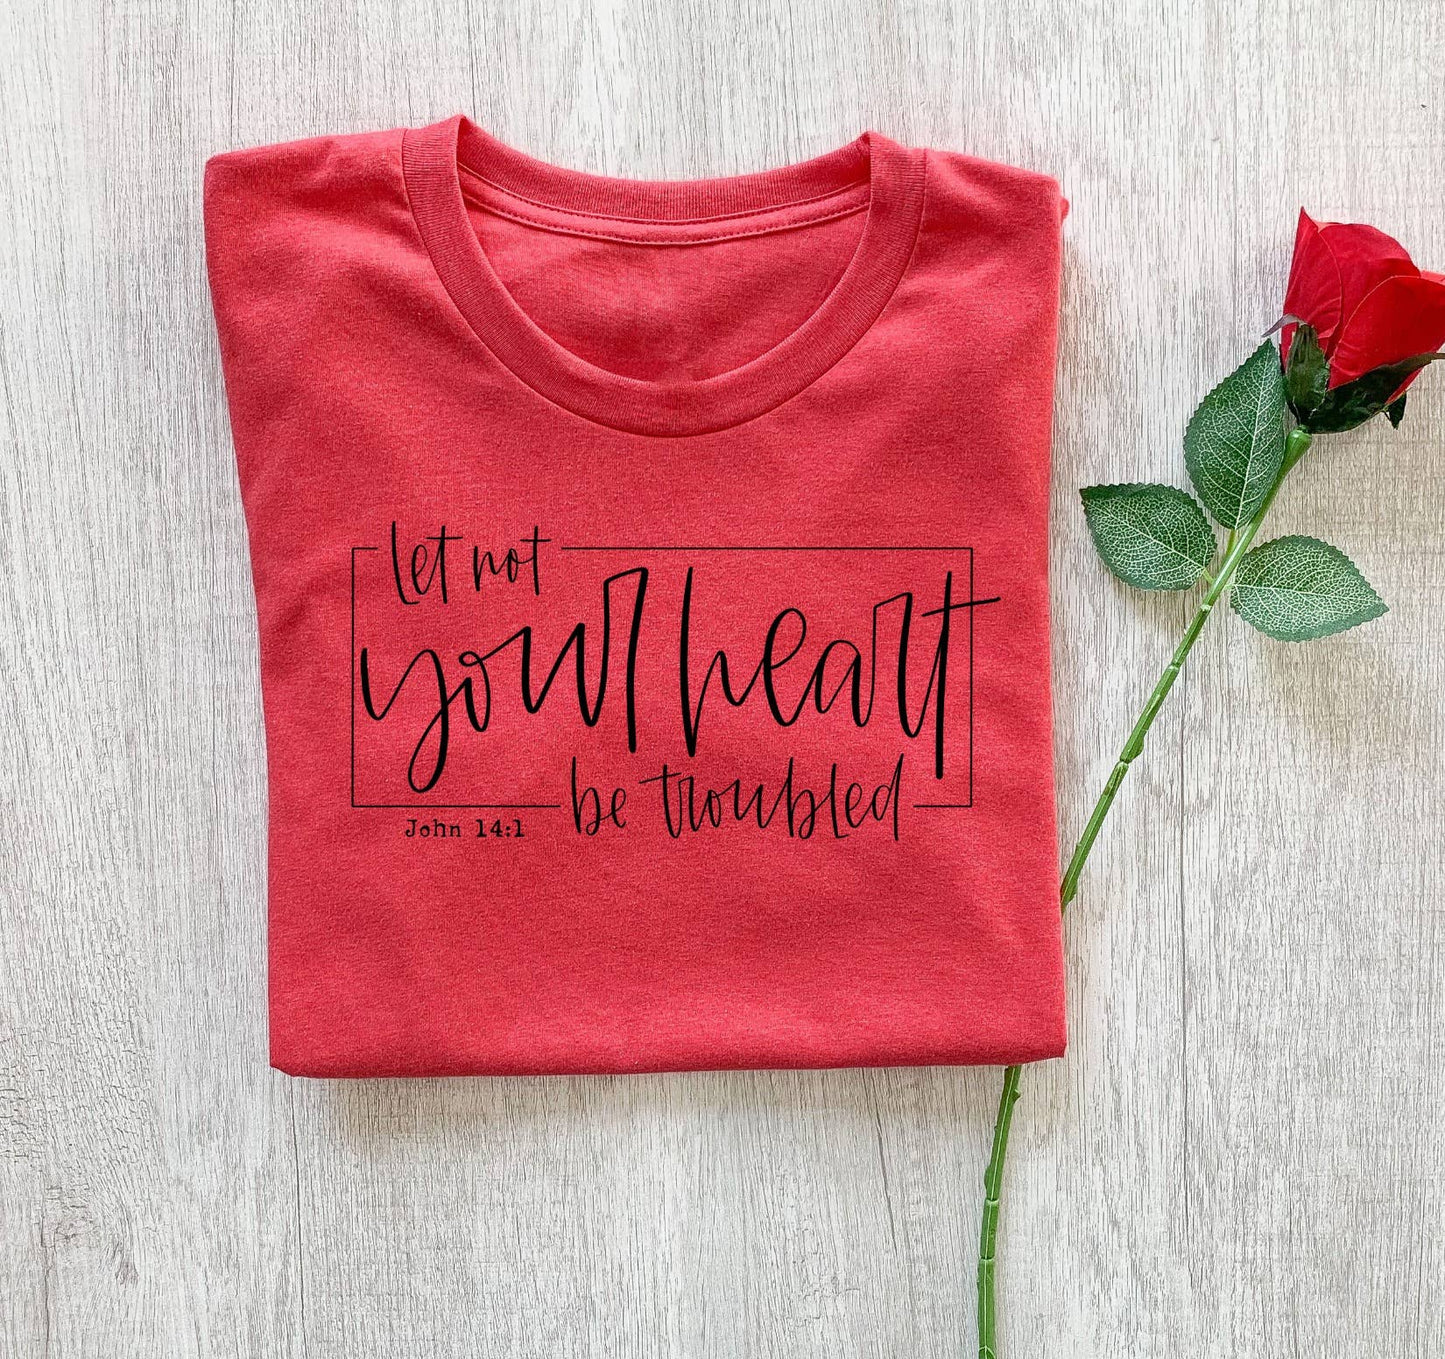 Let Not Your Heart Be Troubled- Adult Tee